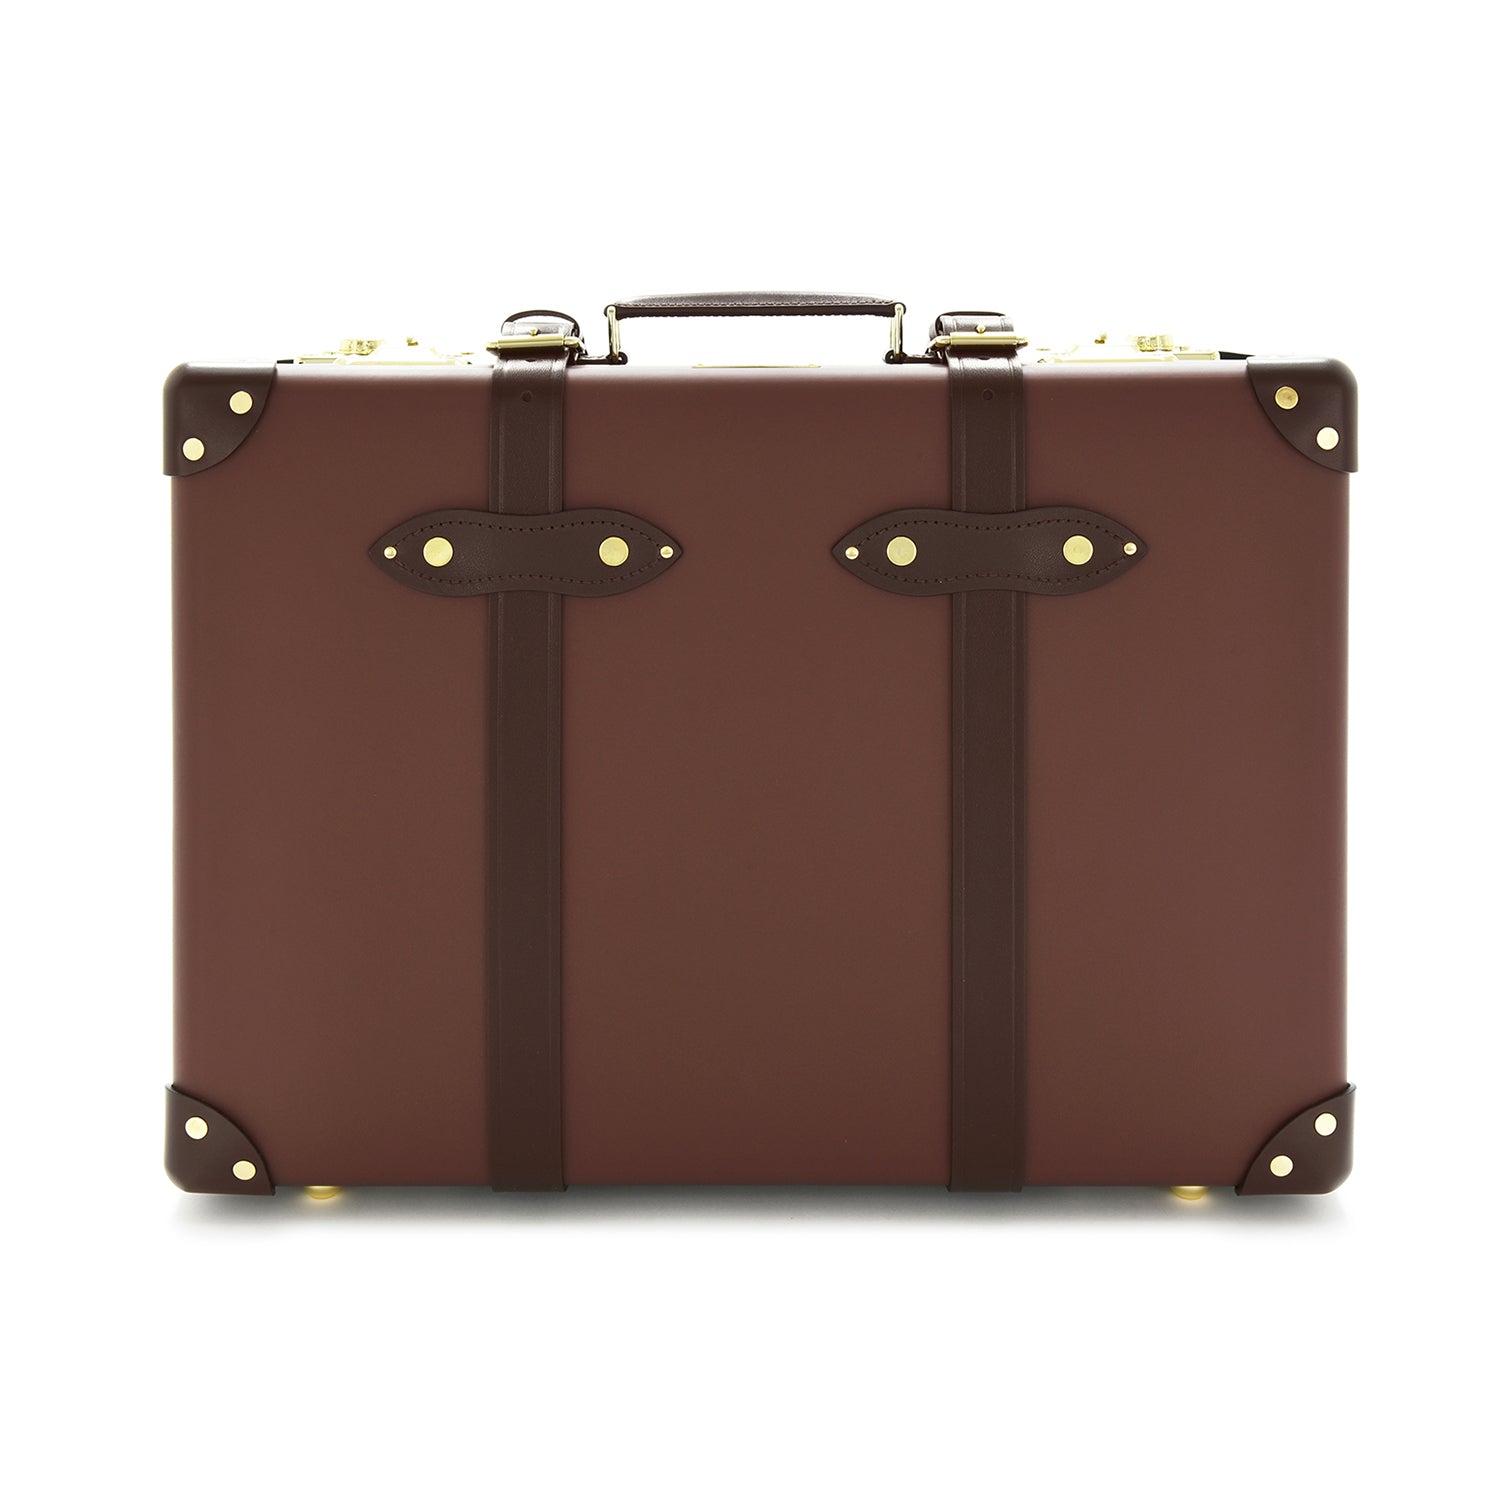 Centenary 125 · Carry-On Suitcase | Heritage Brown/Chocolate - GLOBE-TROTTER